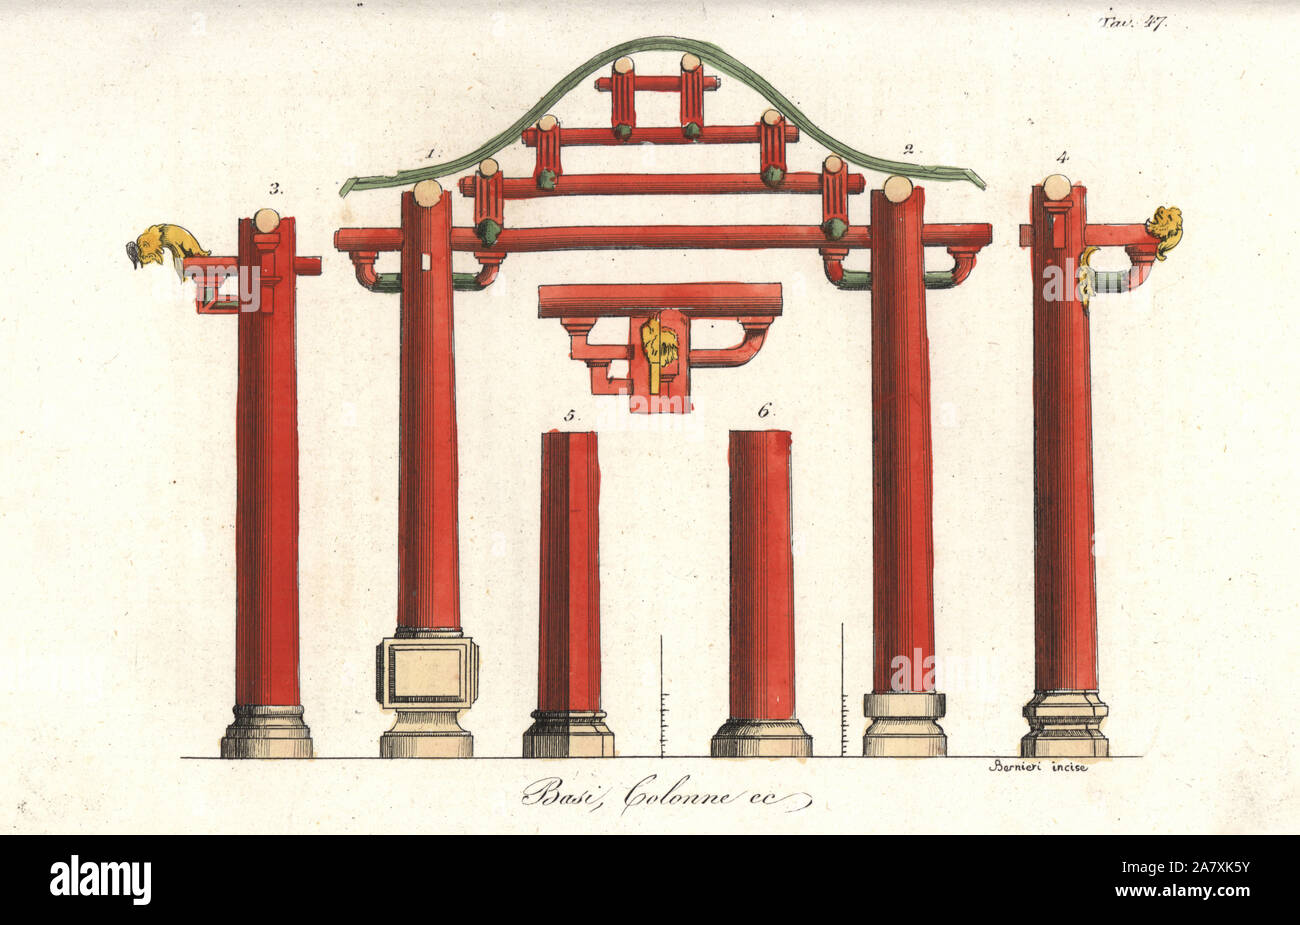 Plinths and columns from Chinese architecture. Handcoloured copperplate engraving by Andrea Bernieri from Giulio Ferrrario's Costumes Antique and Modern of All Peoples (Il Costume Antico e Moderno di Tutti i Popoli), Florence, 1842. Stock Photo